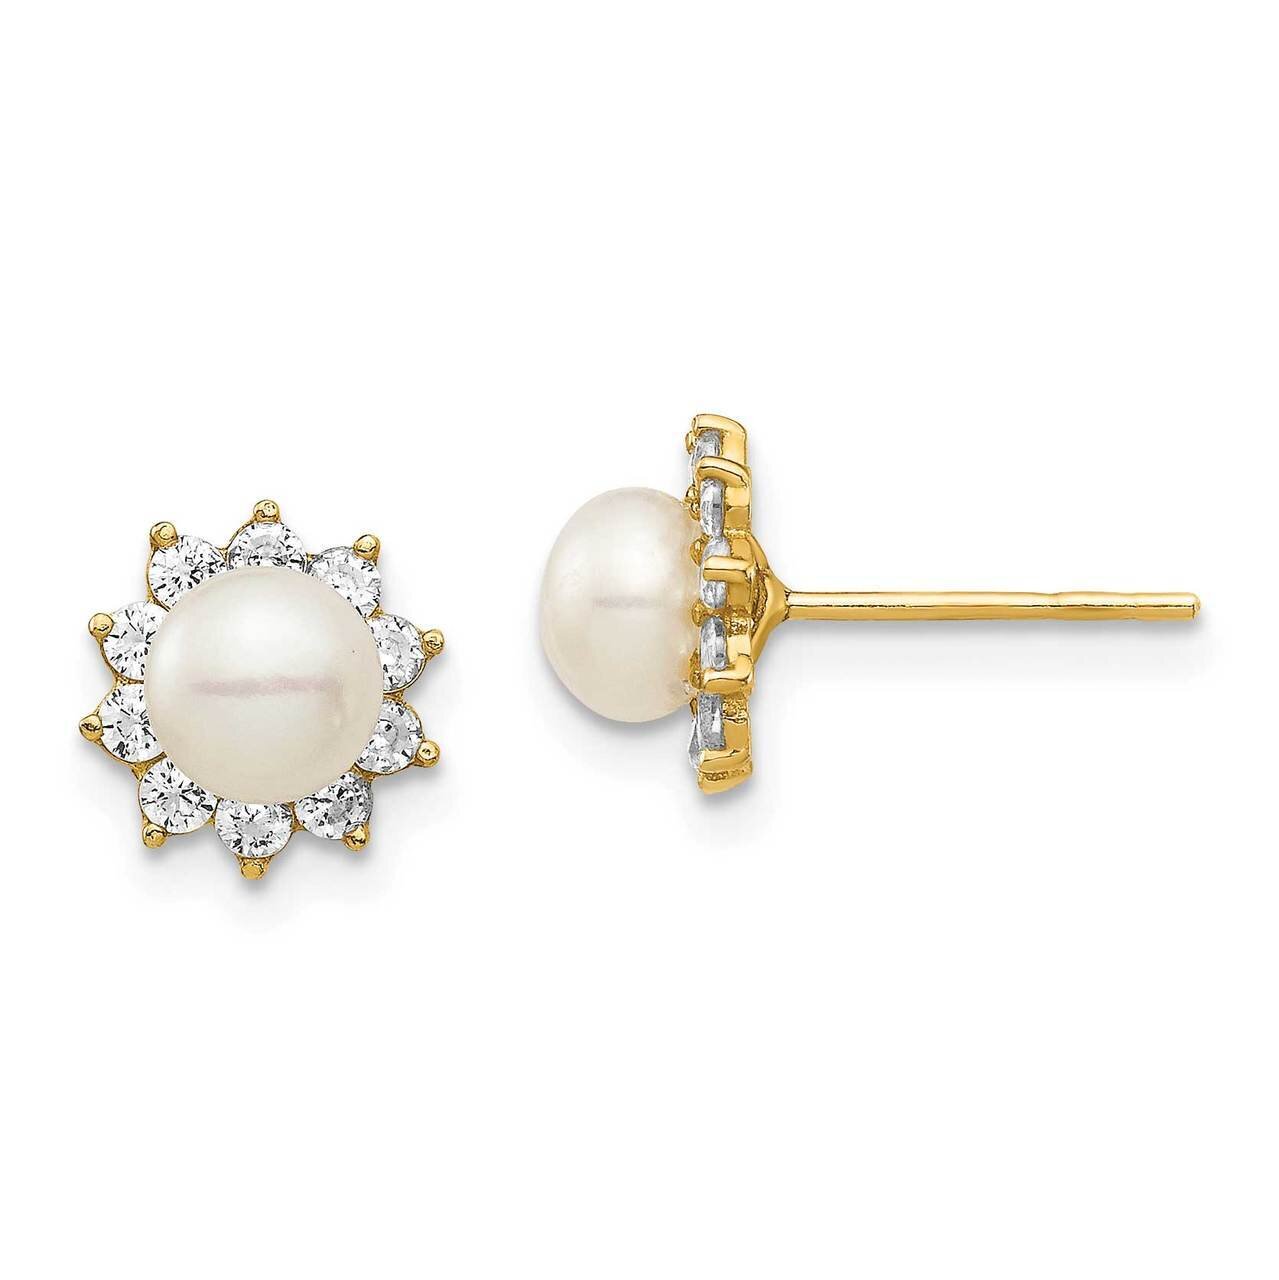 5-6mm White Button Freshwater Cultured Pearl Post Earrings 14k Gold CZ Diamond SE2955